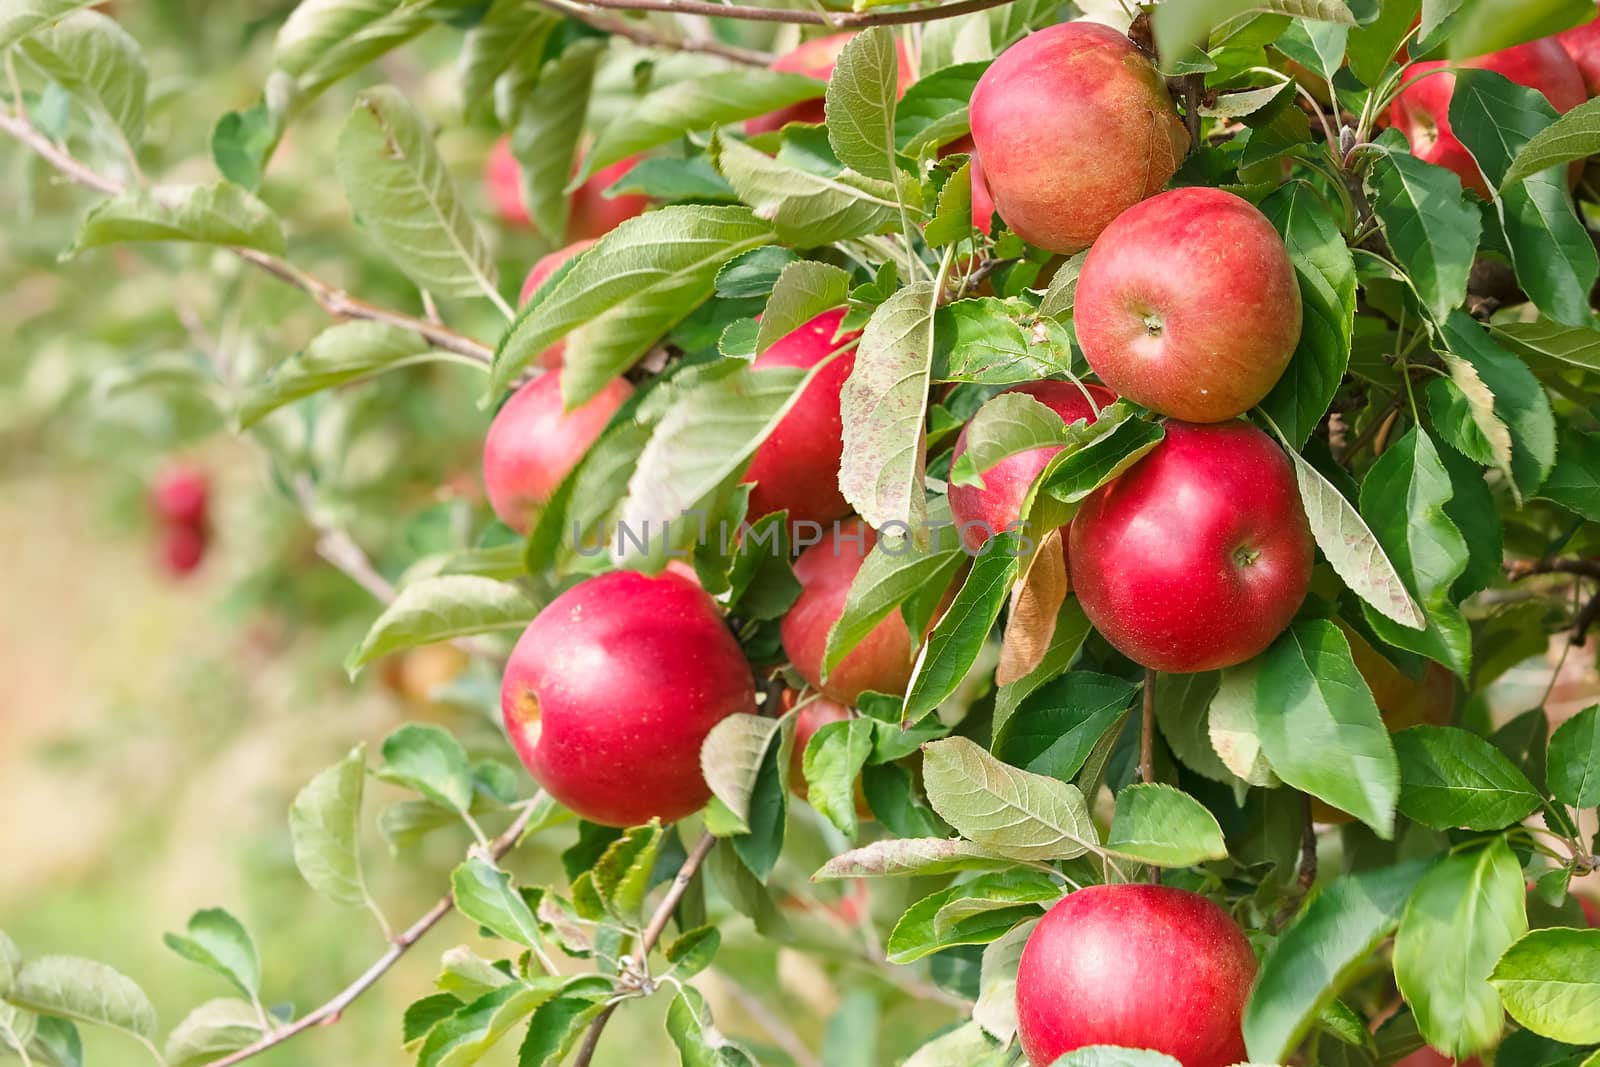 Red ripe apples on the trees in an apple orchard. Selective focus